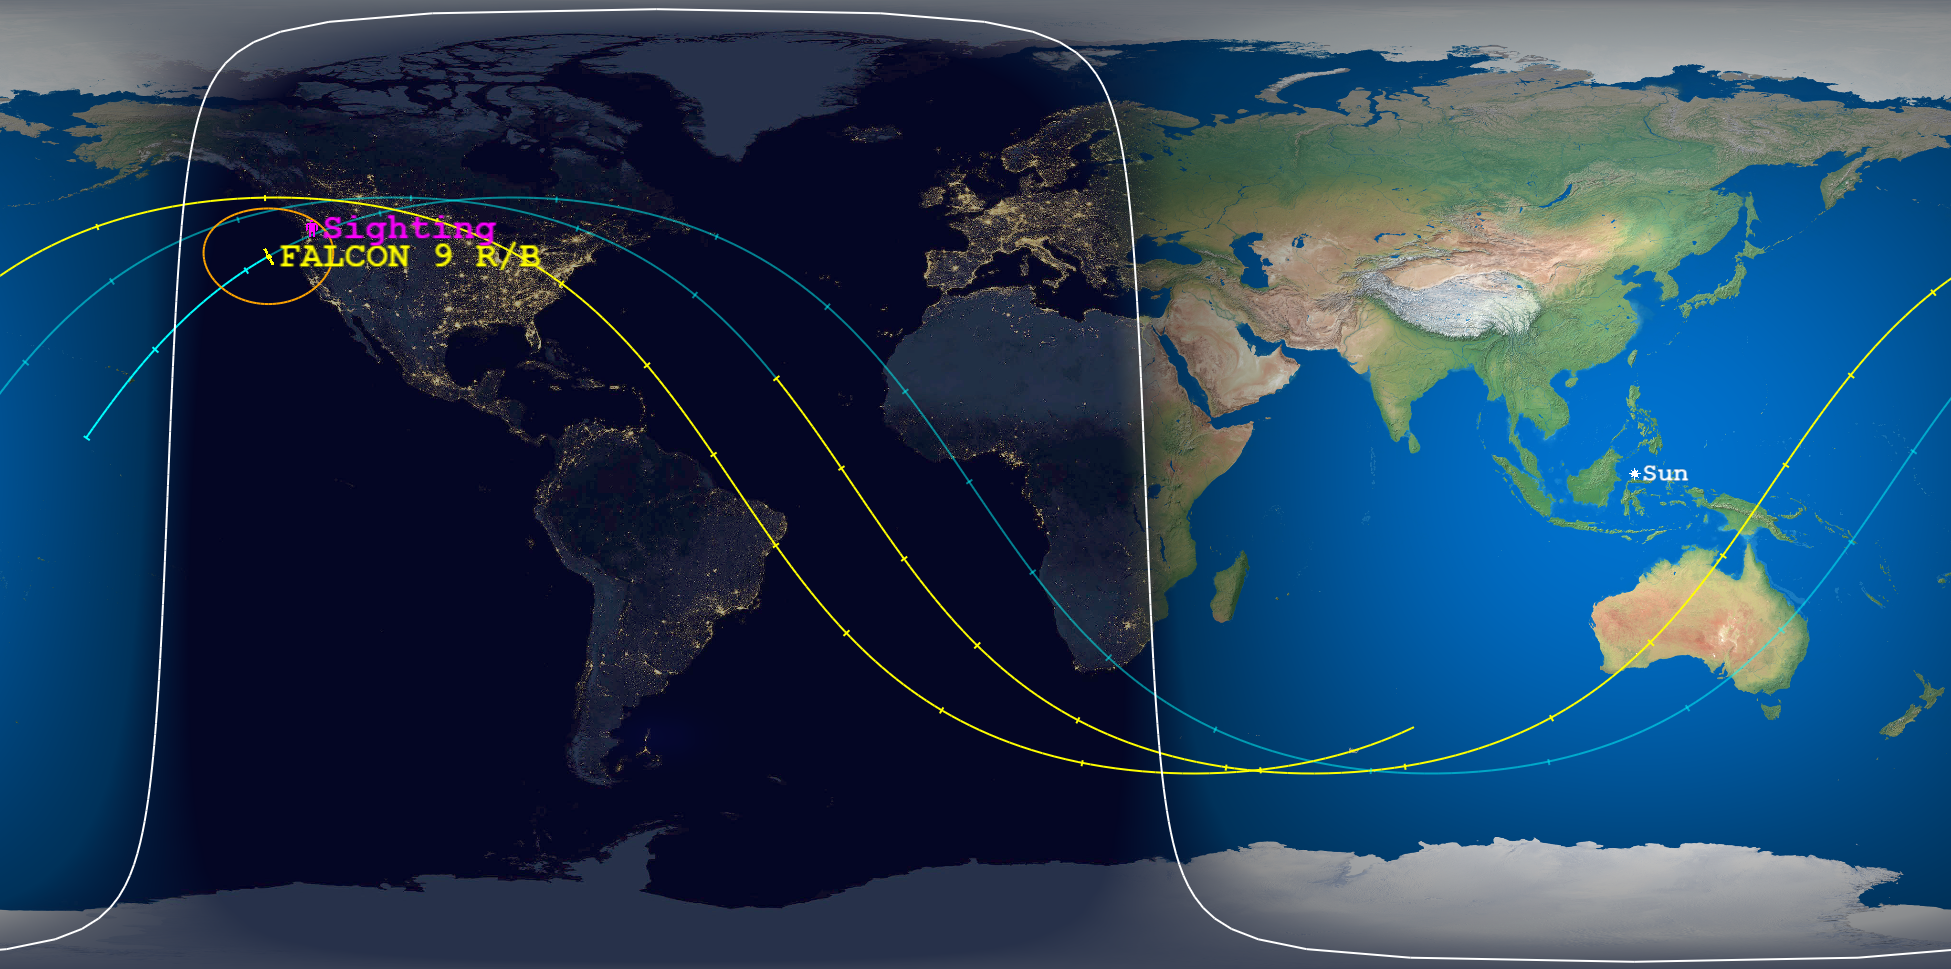 View of reentry sighting compared to central prediction time location.